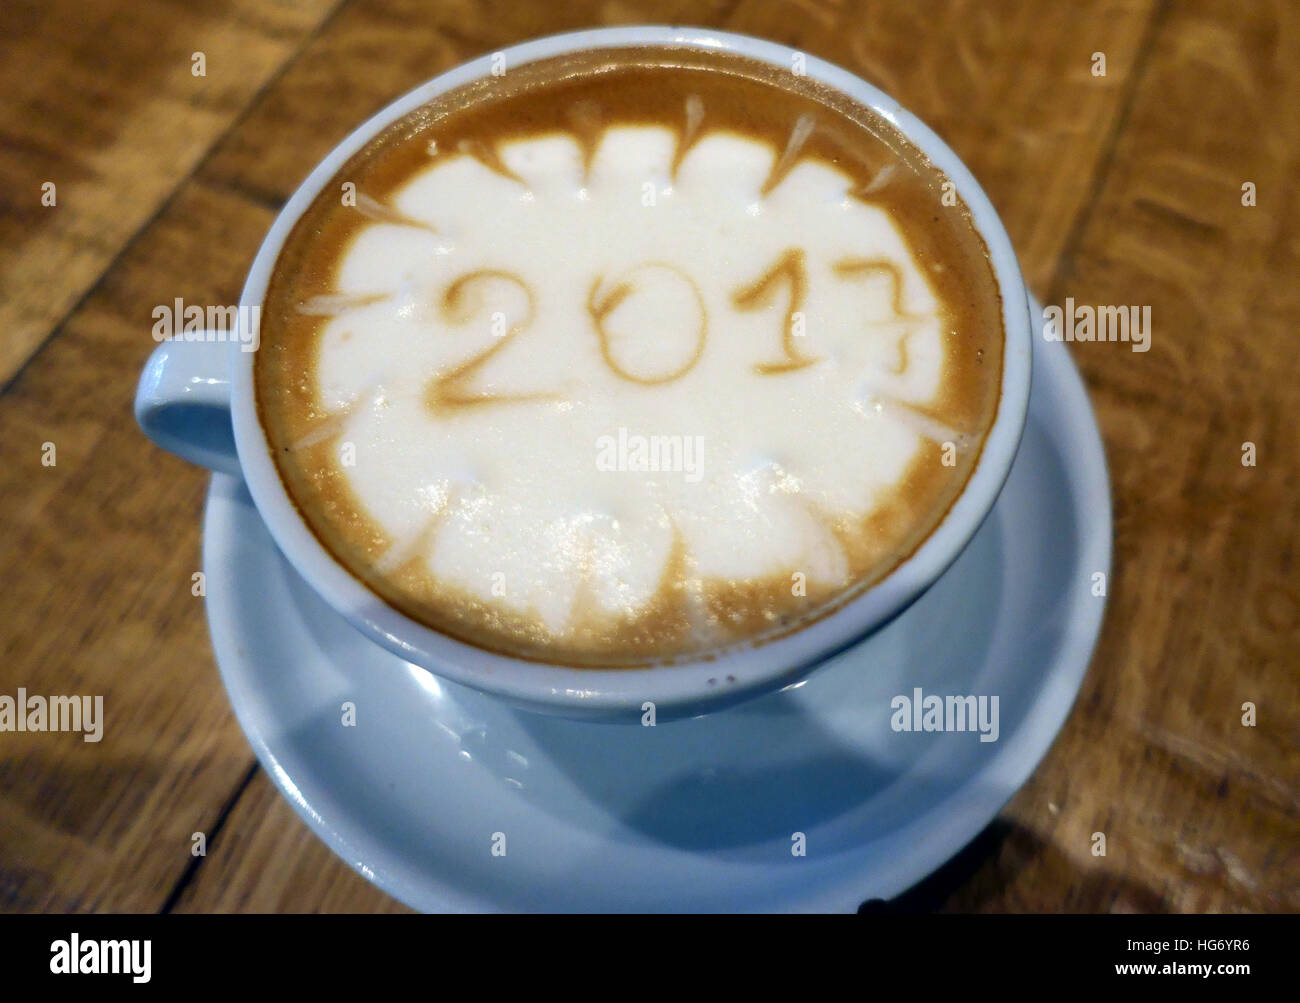 Year 2017 drawn in froth of cup of coffee, London Stock Photo